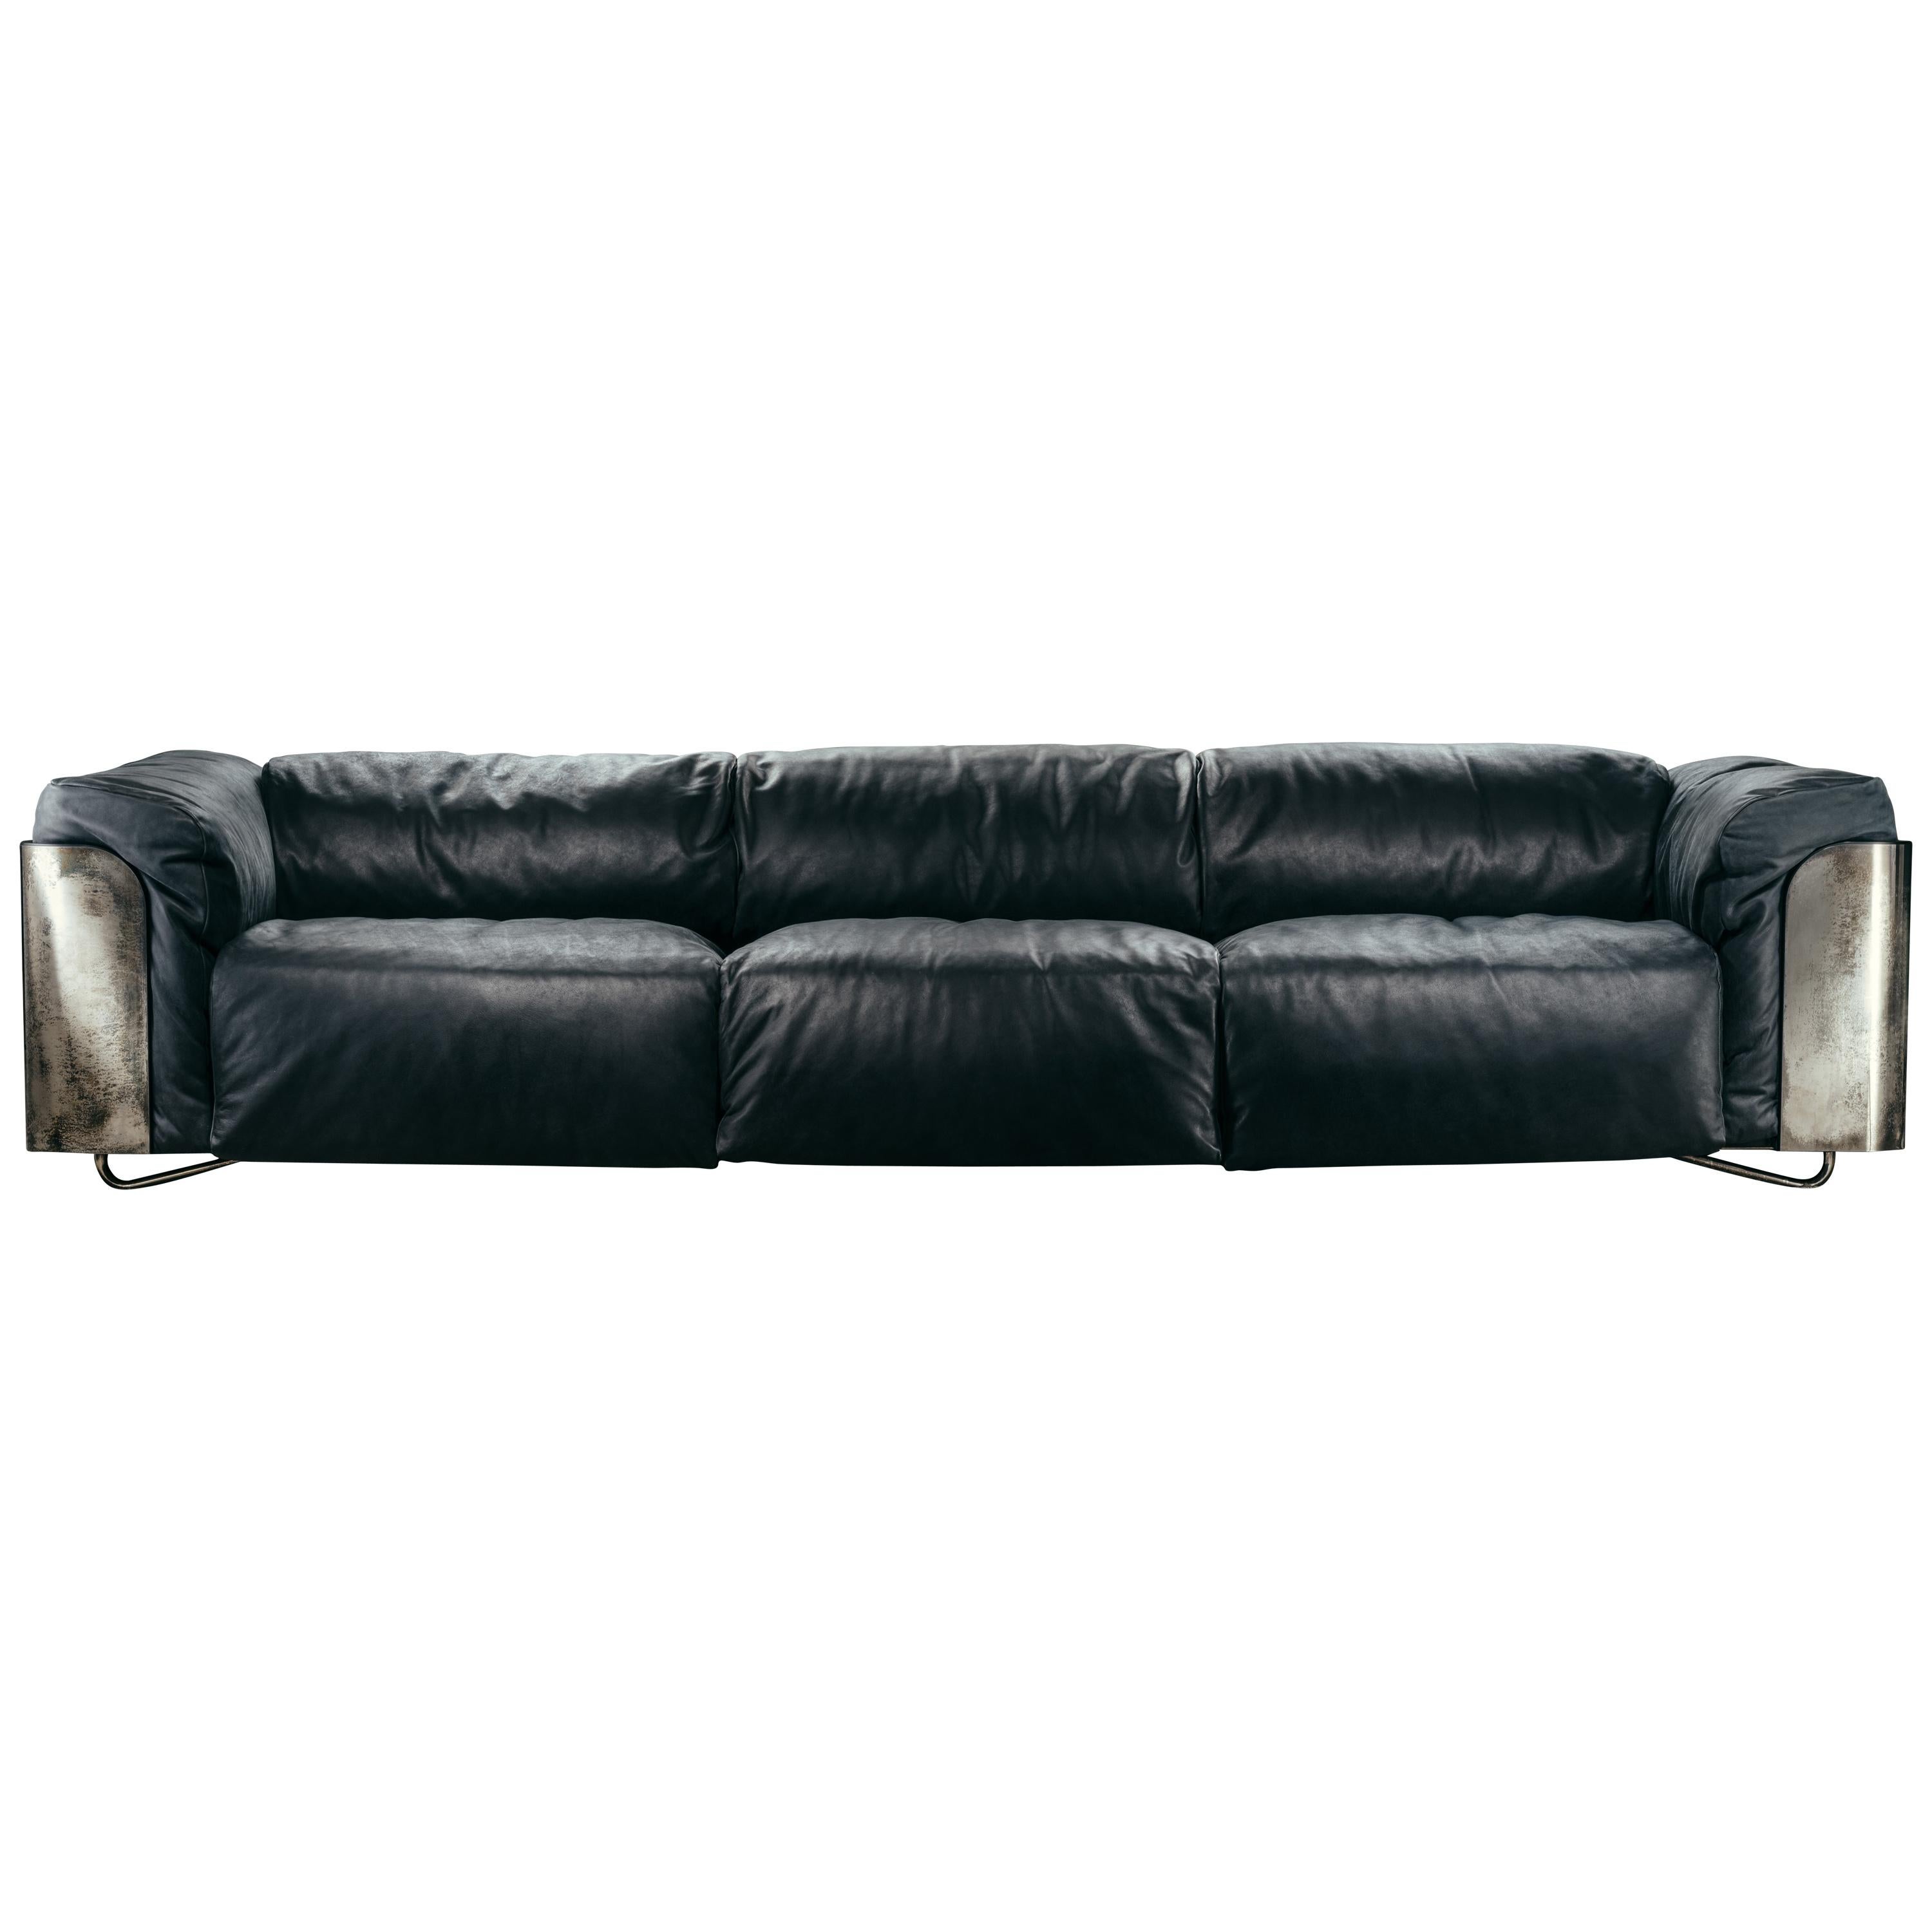 Saint-Germain 3-Seat Sofa in Black Timeless Leather and Raw Silver For Sale